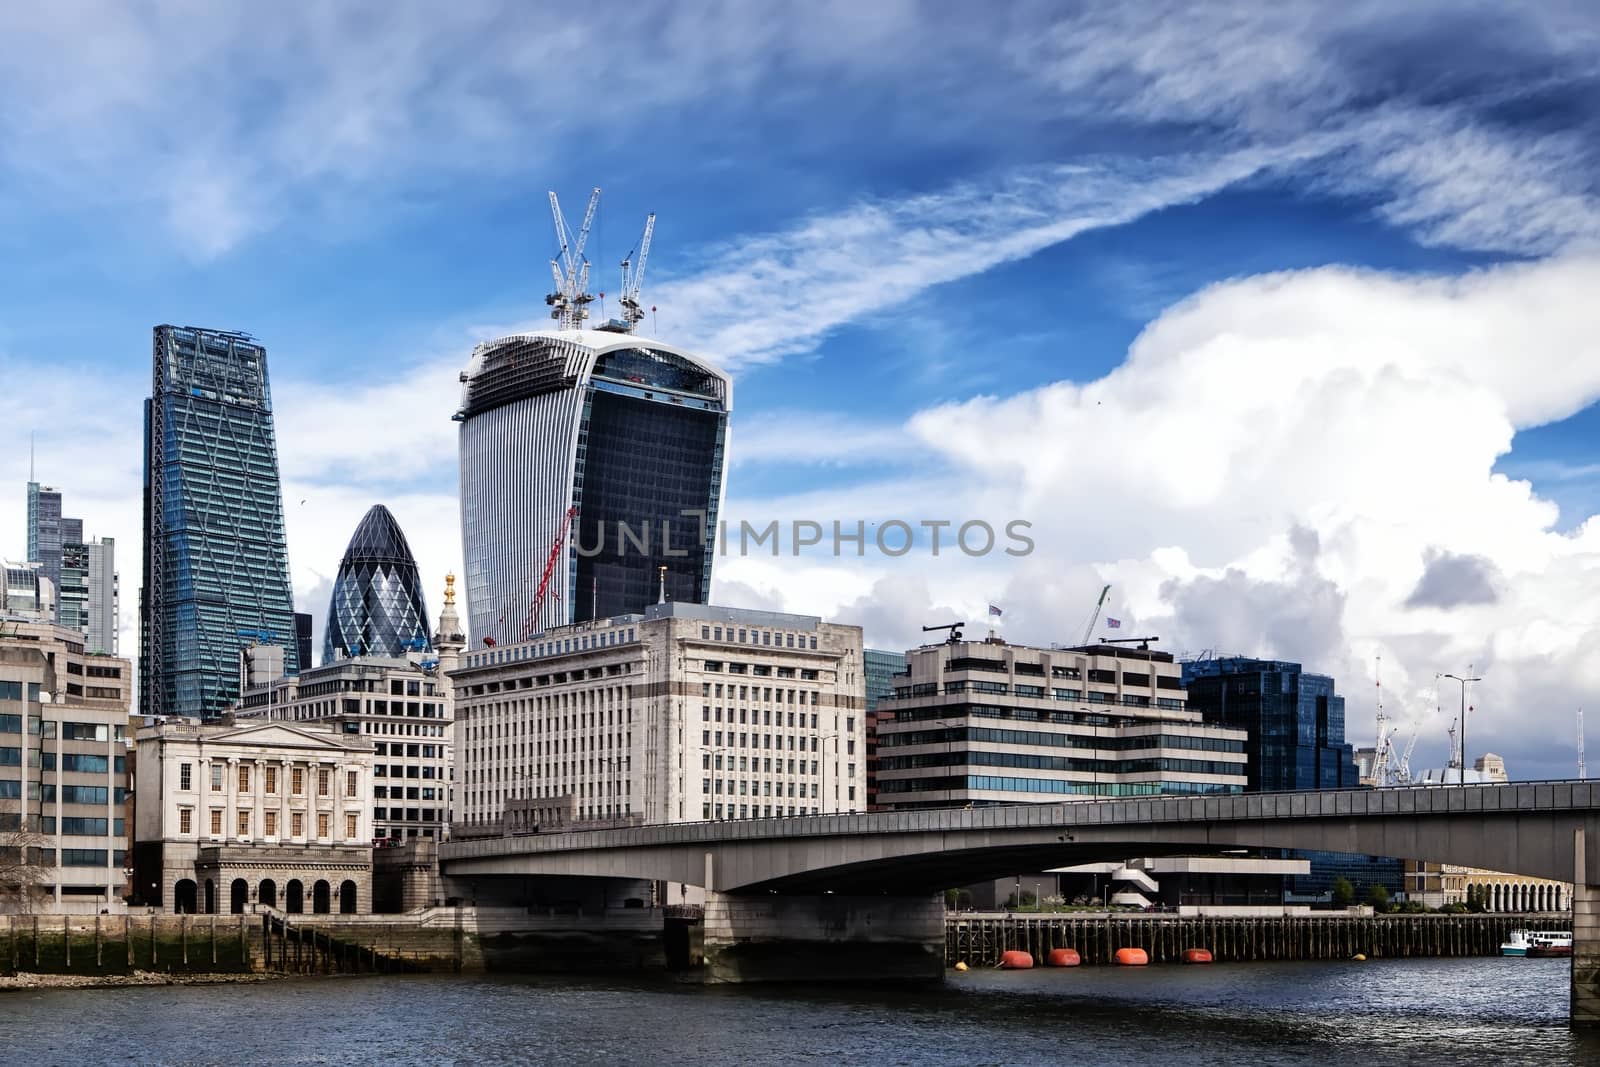 The City is a tiny part of the metropolis of the London region. It holds city status in its own right and is also a separate ceremonial county.